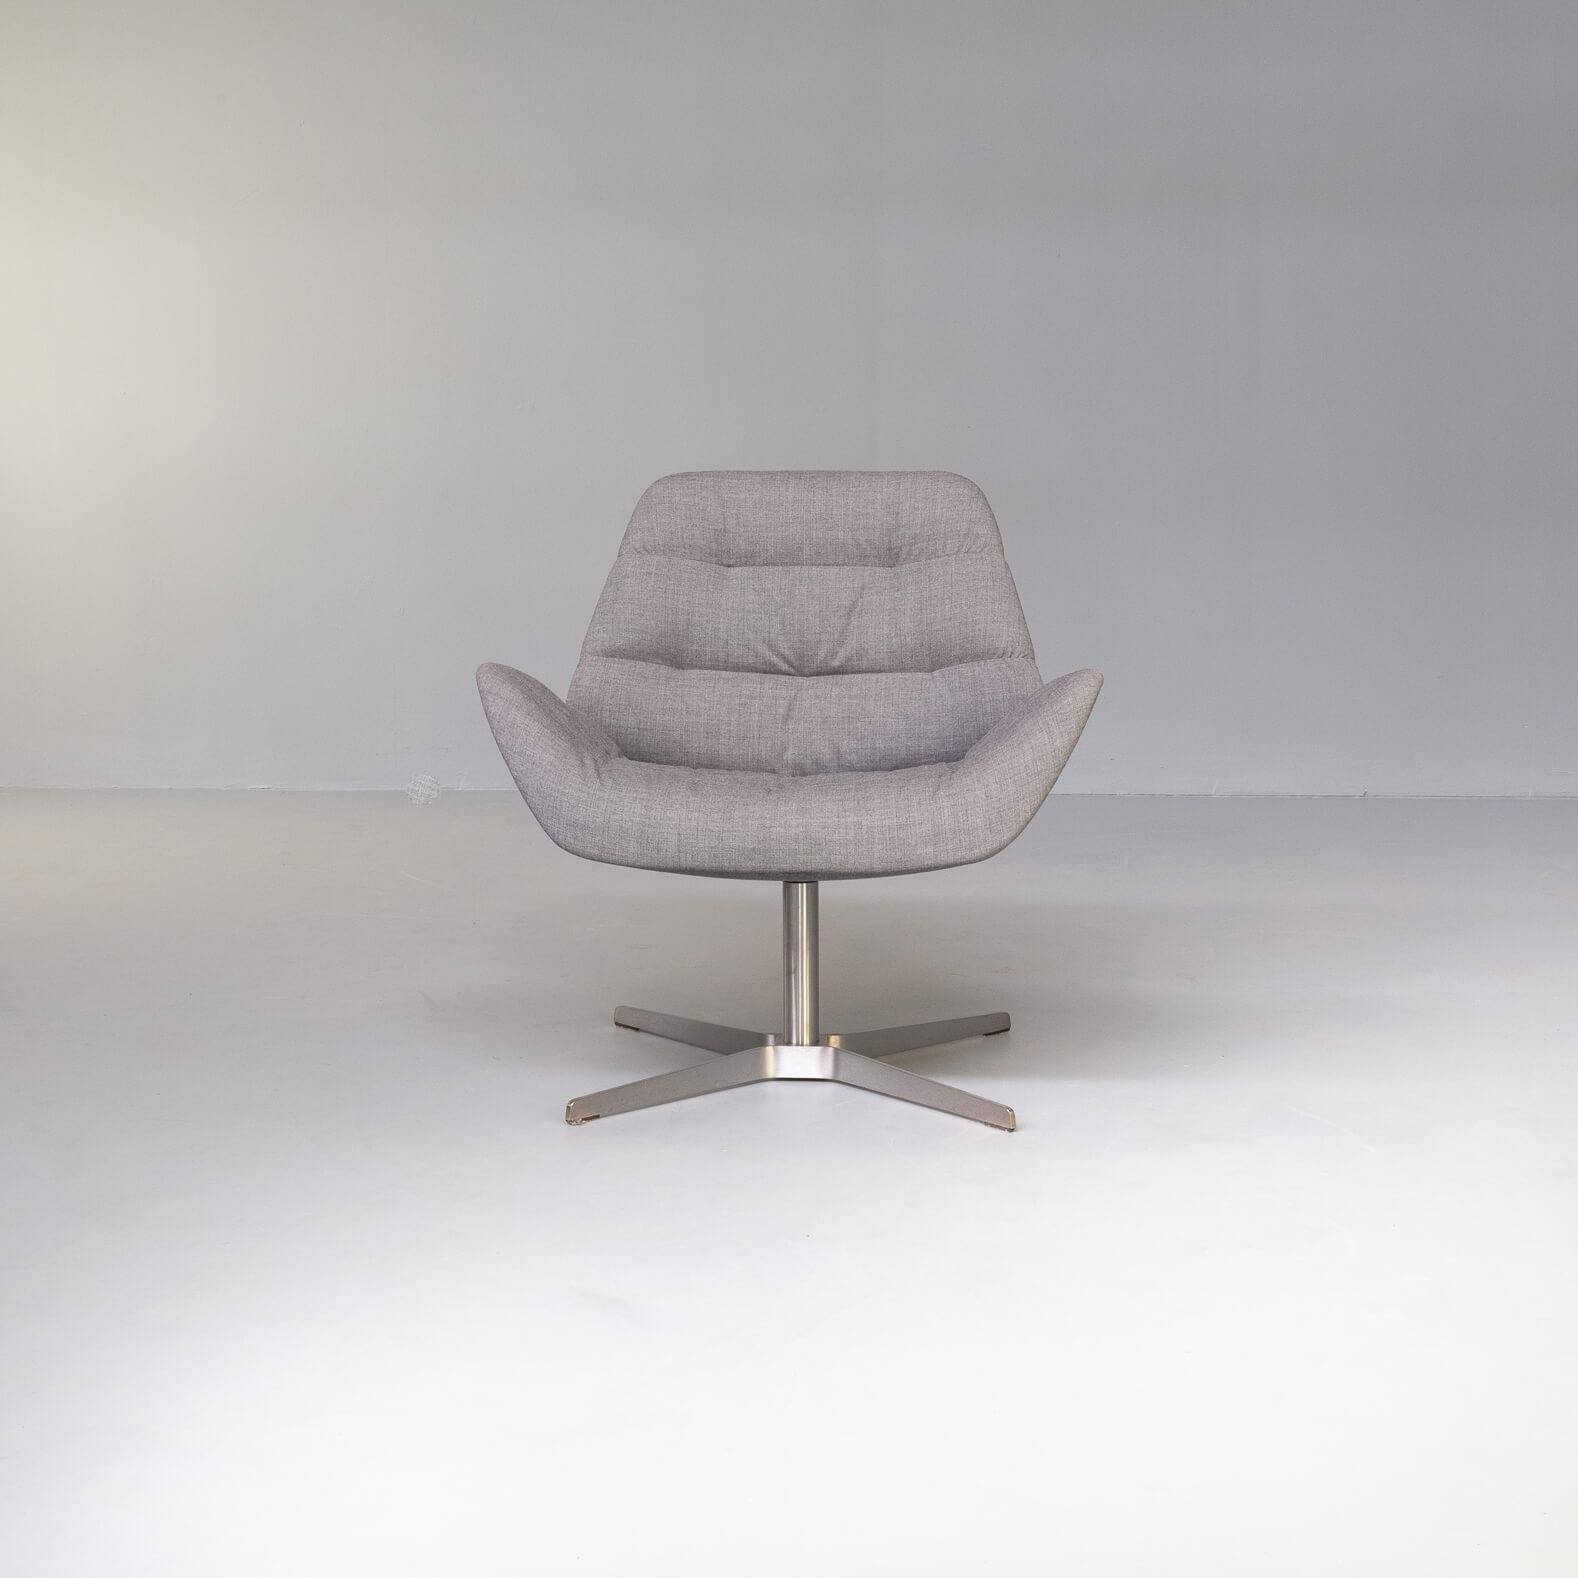 The 809 armchair is the little brother of the 808 armchair by Thonet and was designed by the German design duo Formstelle. Just like its big brother, this armchair is extremely comfortable and, thanks to its more compact size, has a more open